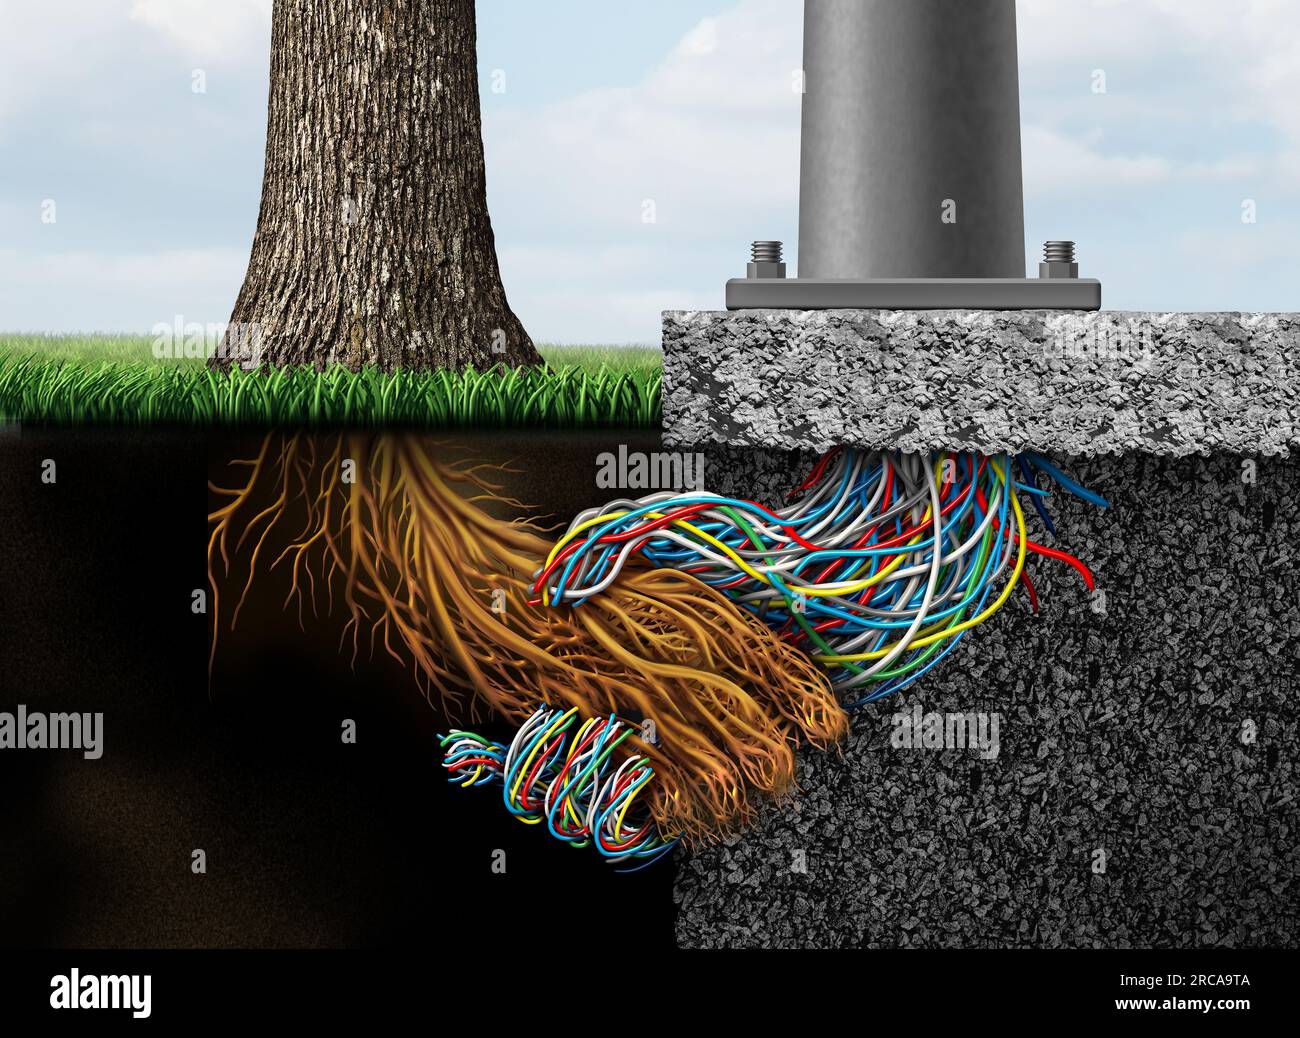 Nature And Technology and industrialization or urban planning with a tree root and electrical wires merging in agreement as a symbol for balance Stock Photo